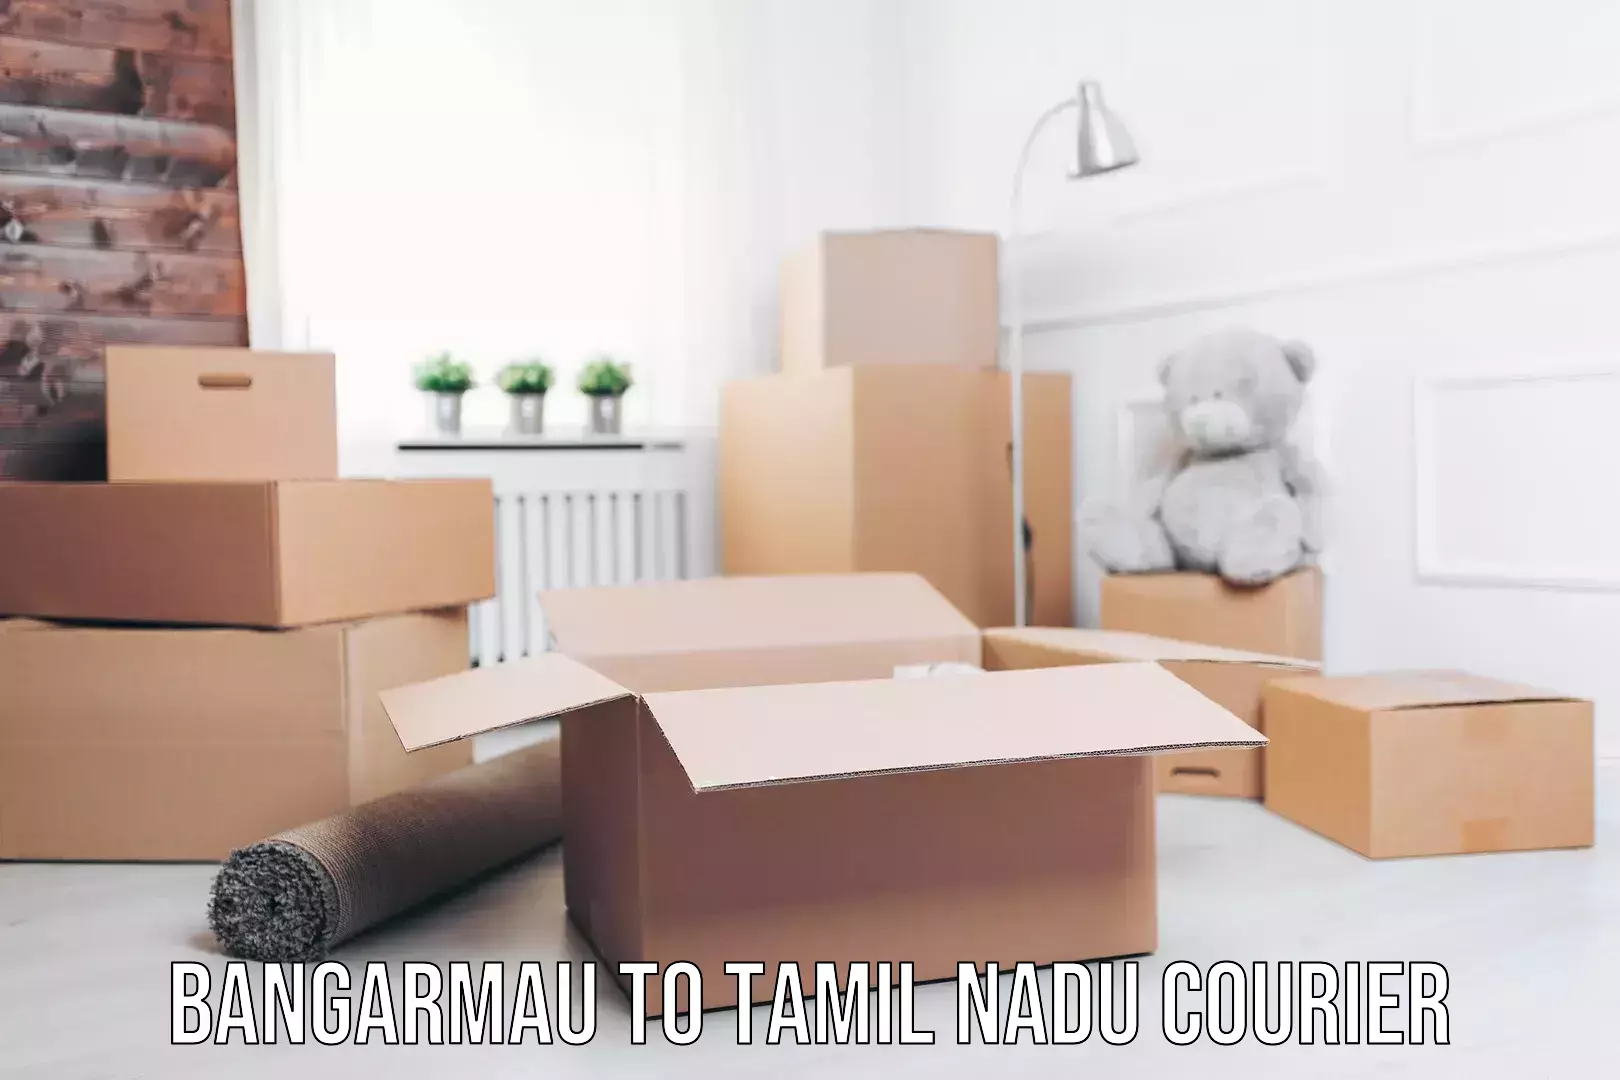 State-of-the-art courier technology Bangarmau to Tamil Nadu